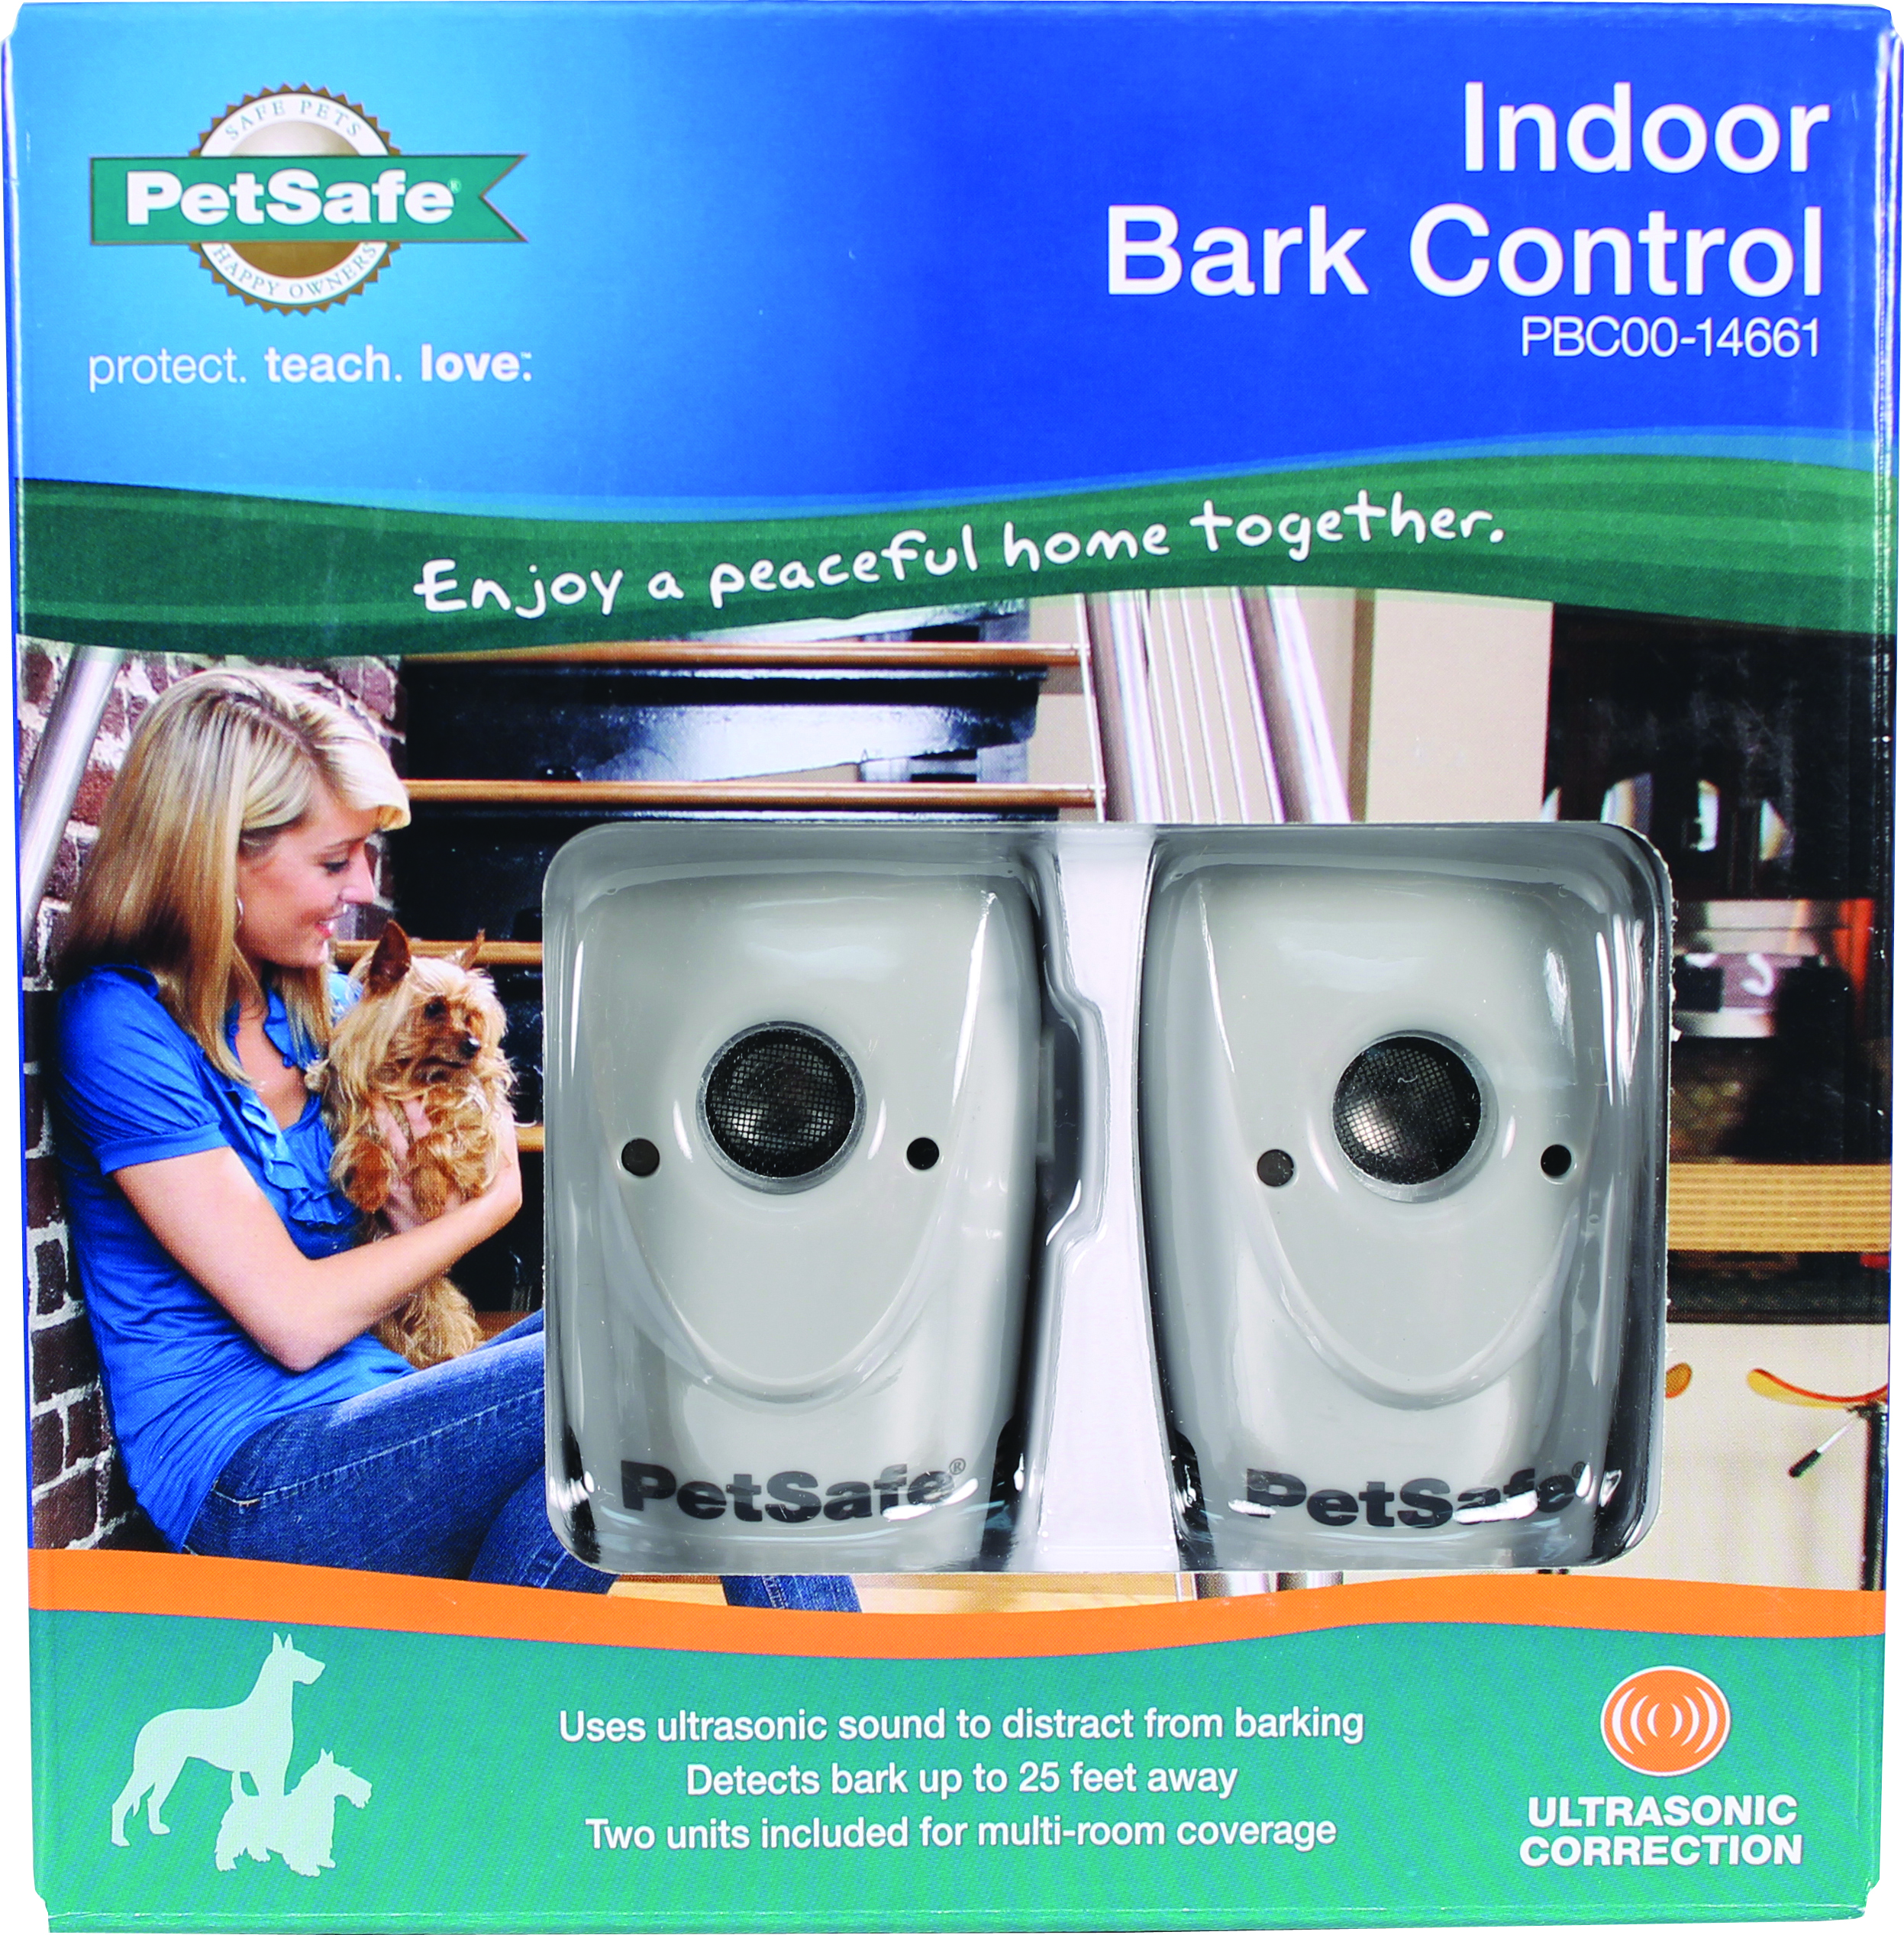 INDOOR BARK CONTROL FOR DOGS